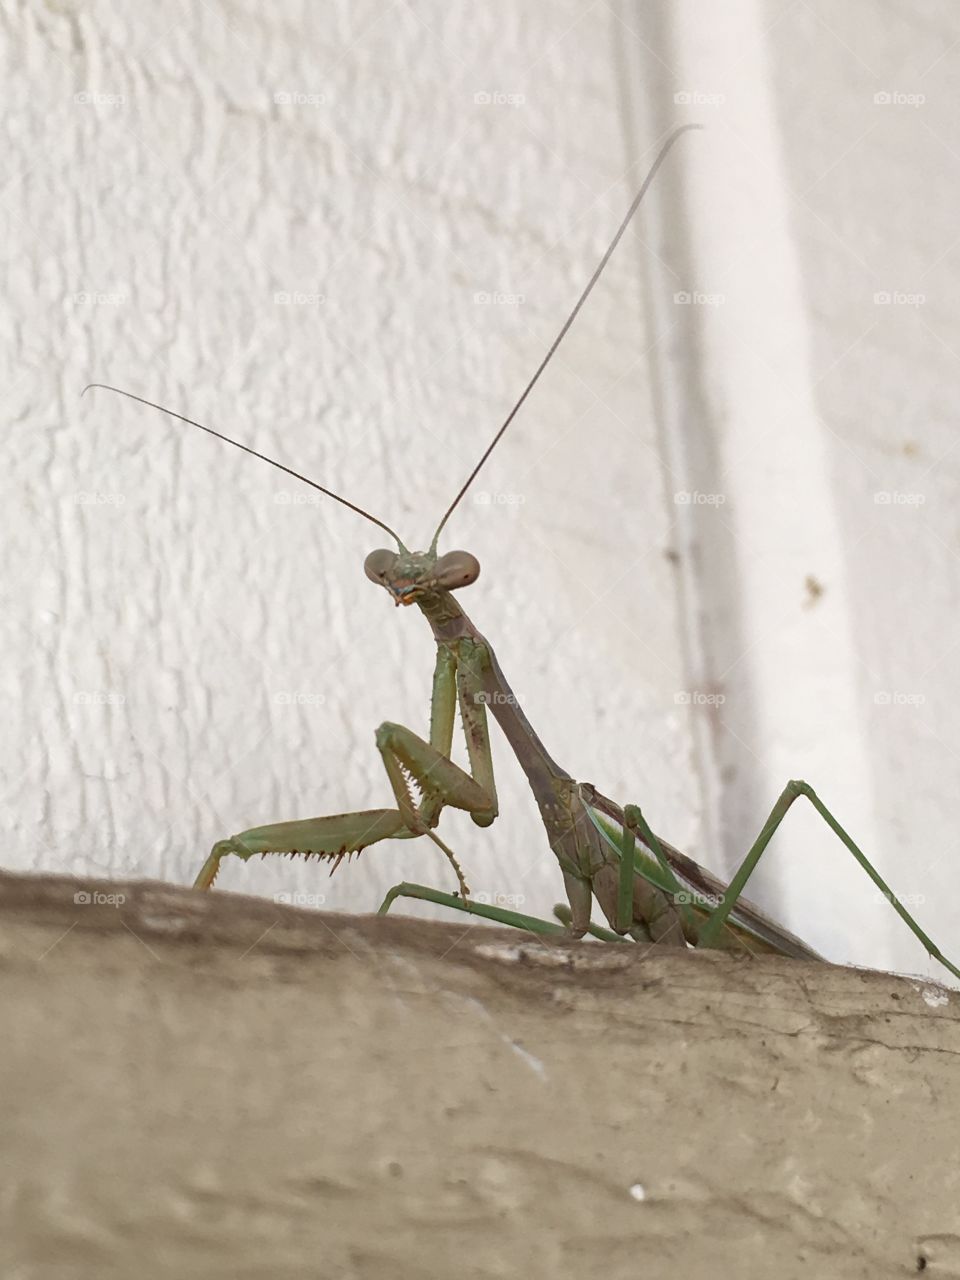 Giving you the look is this praying mantis.